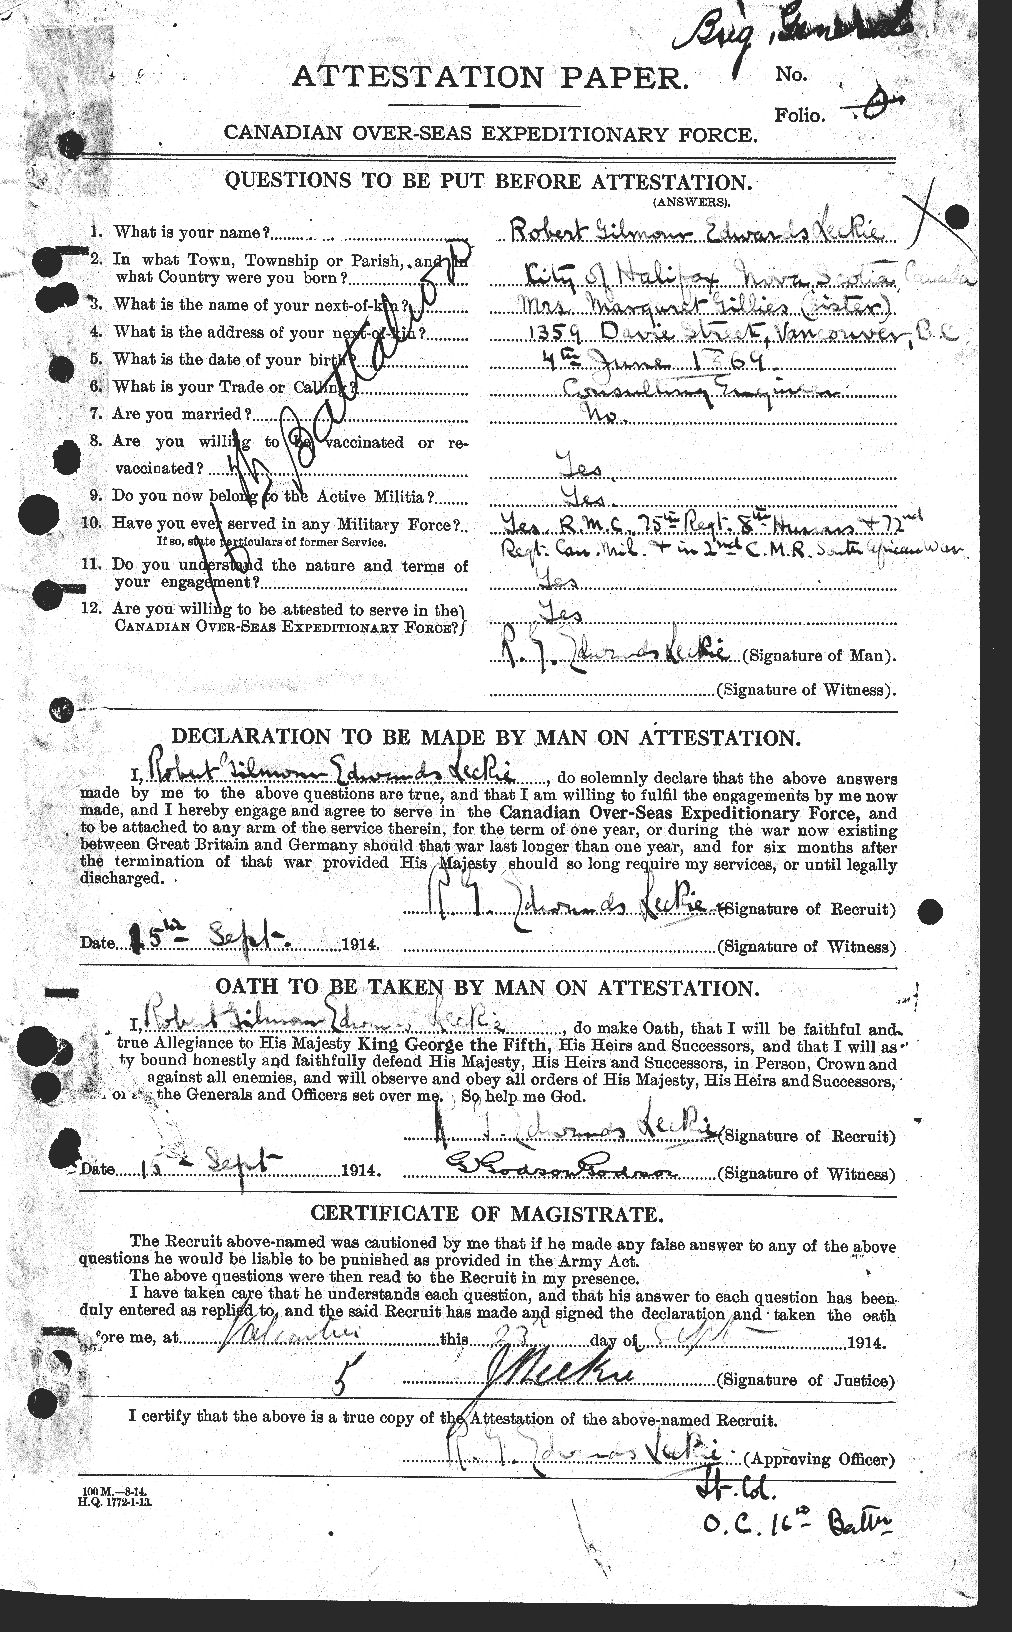 Personnel Records of the First World War - CEF 453611a